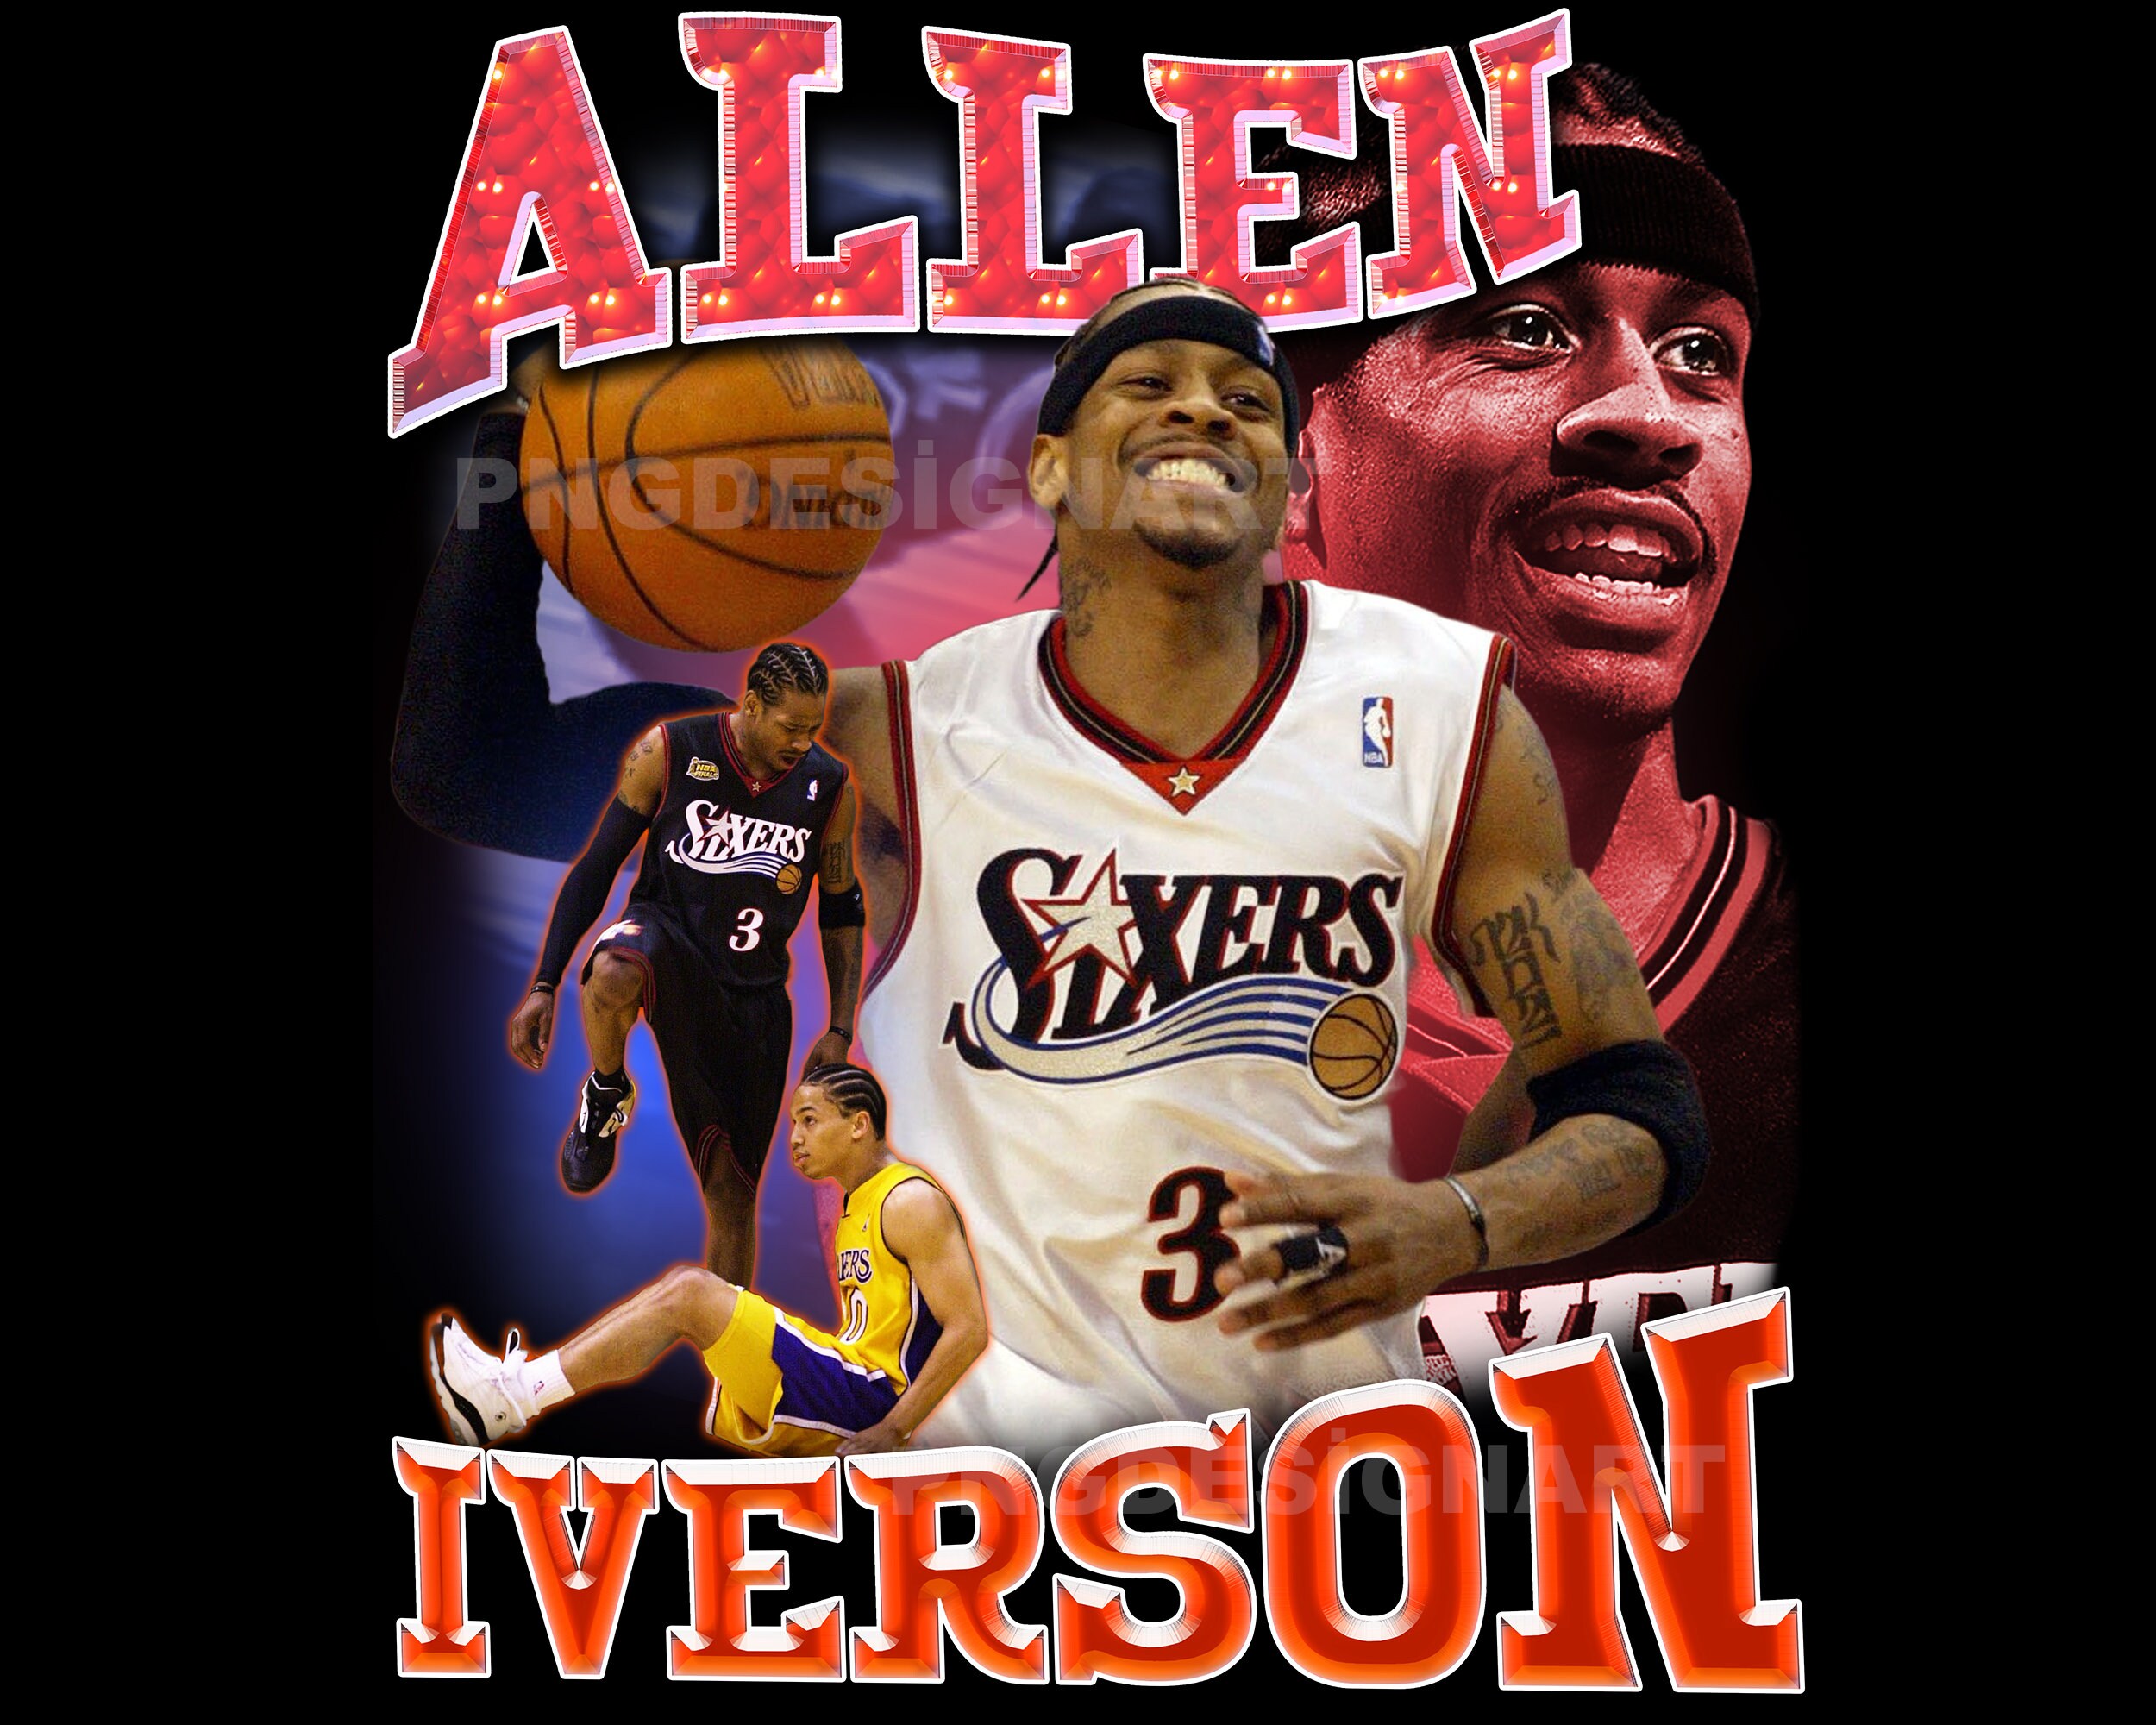 Allen Iverson wallpaper I made in the style of a vintage bootleg